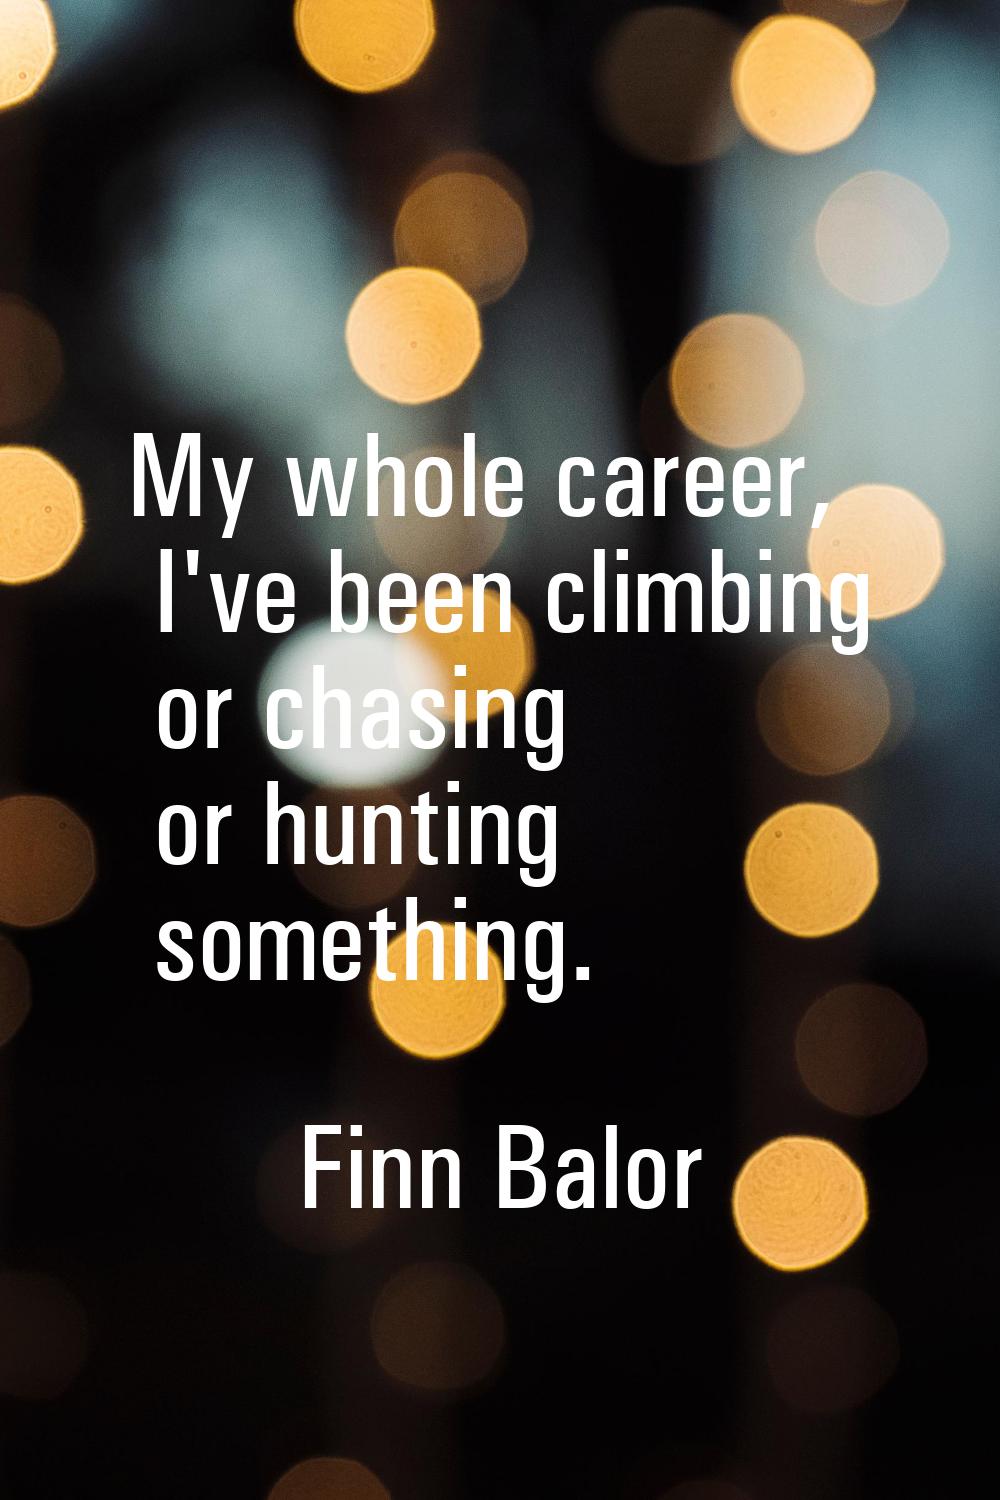 My whole career, I've been climbing or chasing or hunting something.